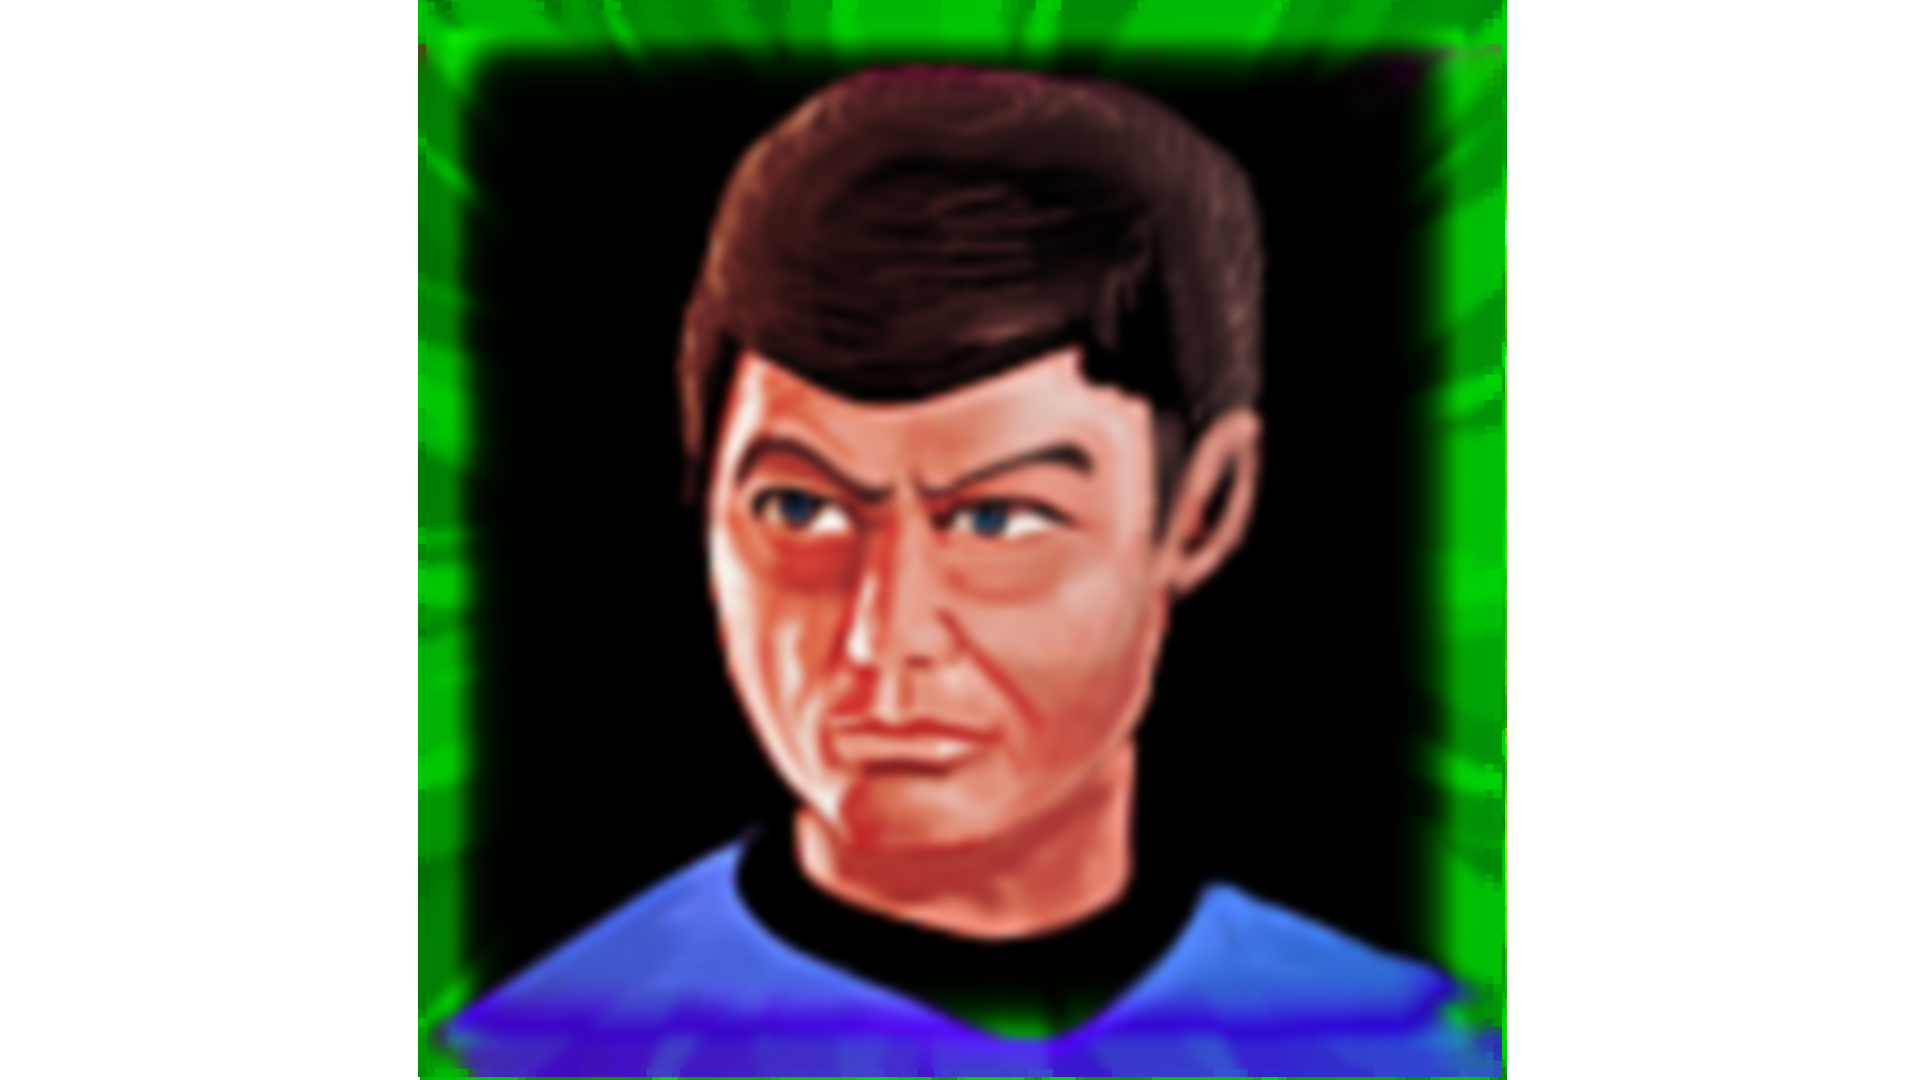 Icon for DR. MCCOY